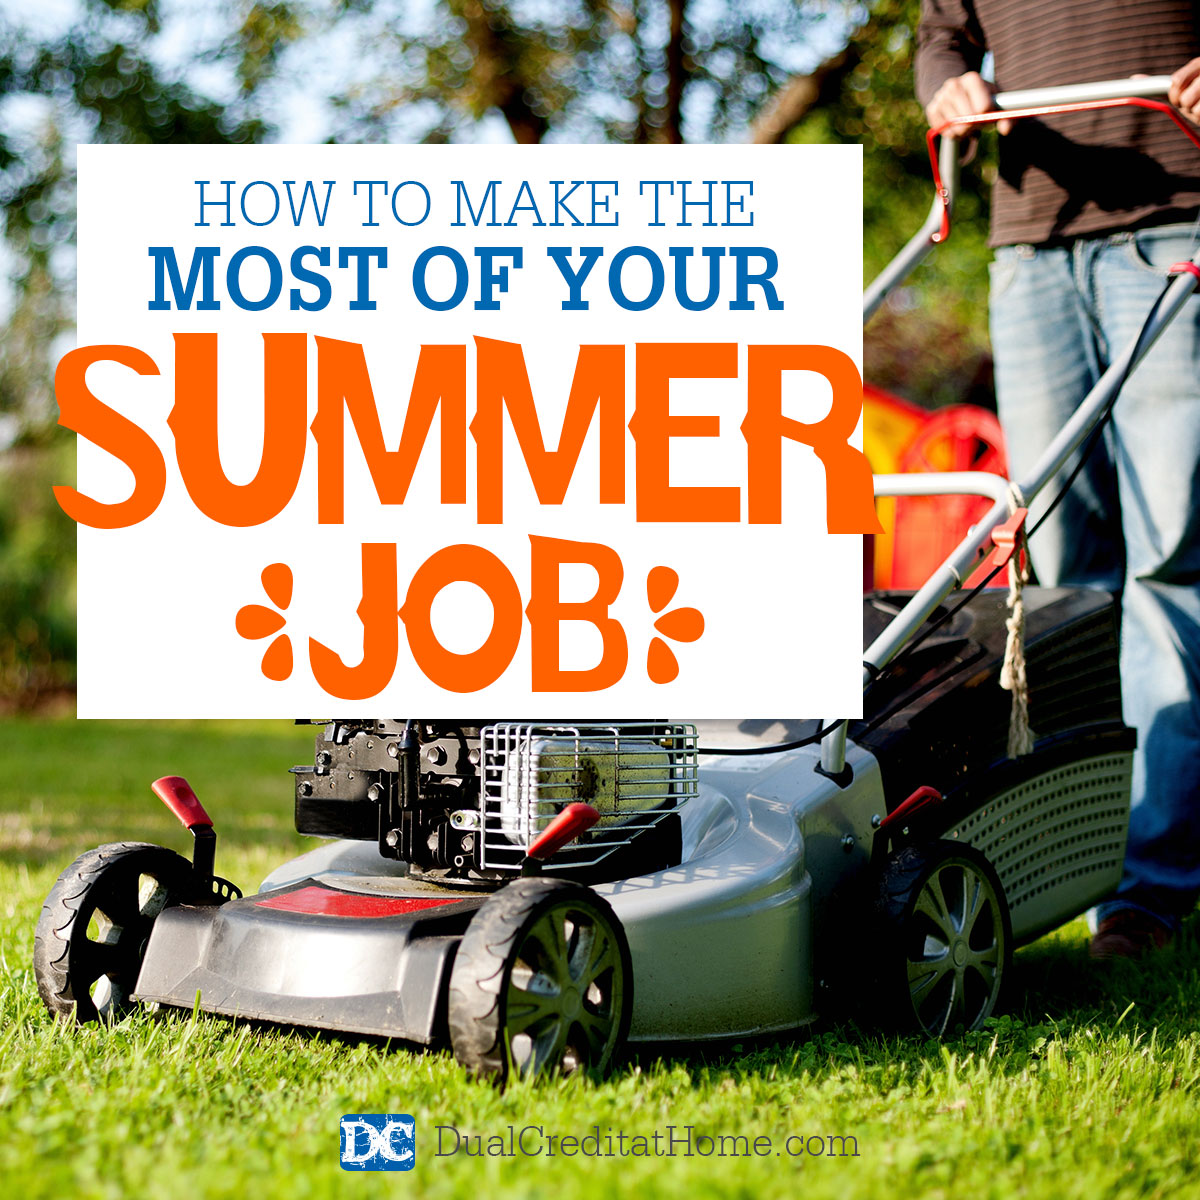 How to Make the Most of Your Summer Job